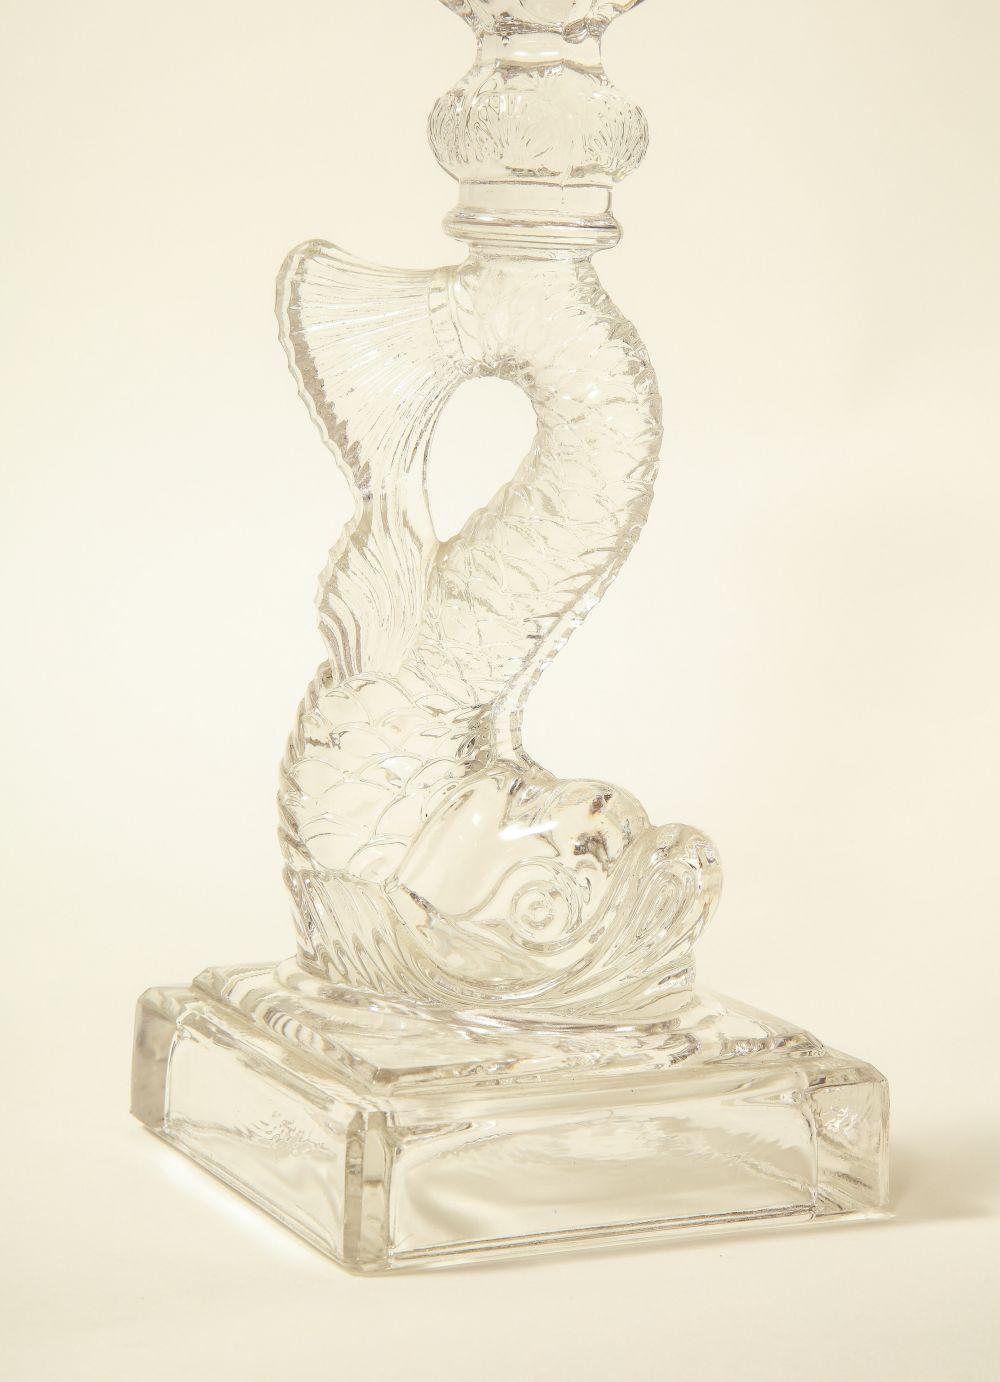 20th Century A Pair of Regency Style Dolphin-Form Glass Candlesticks